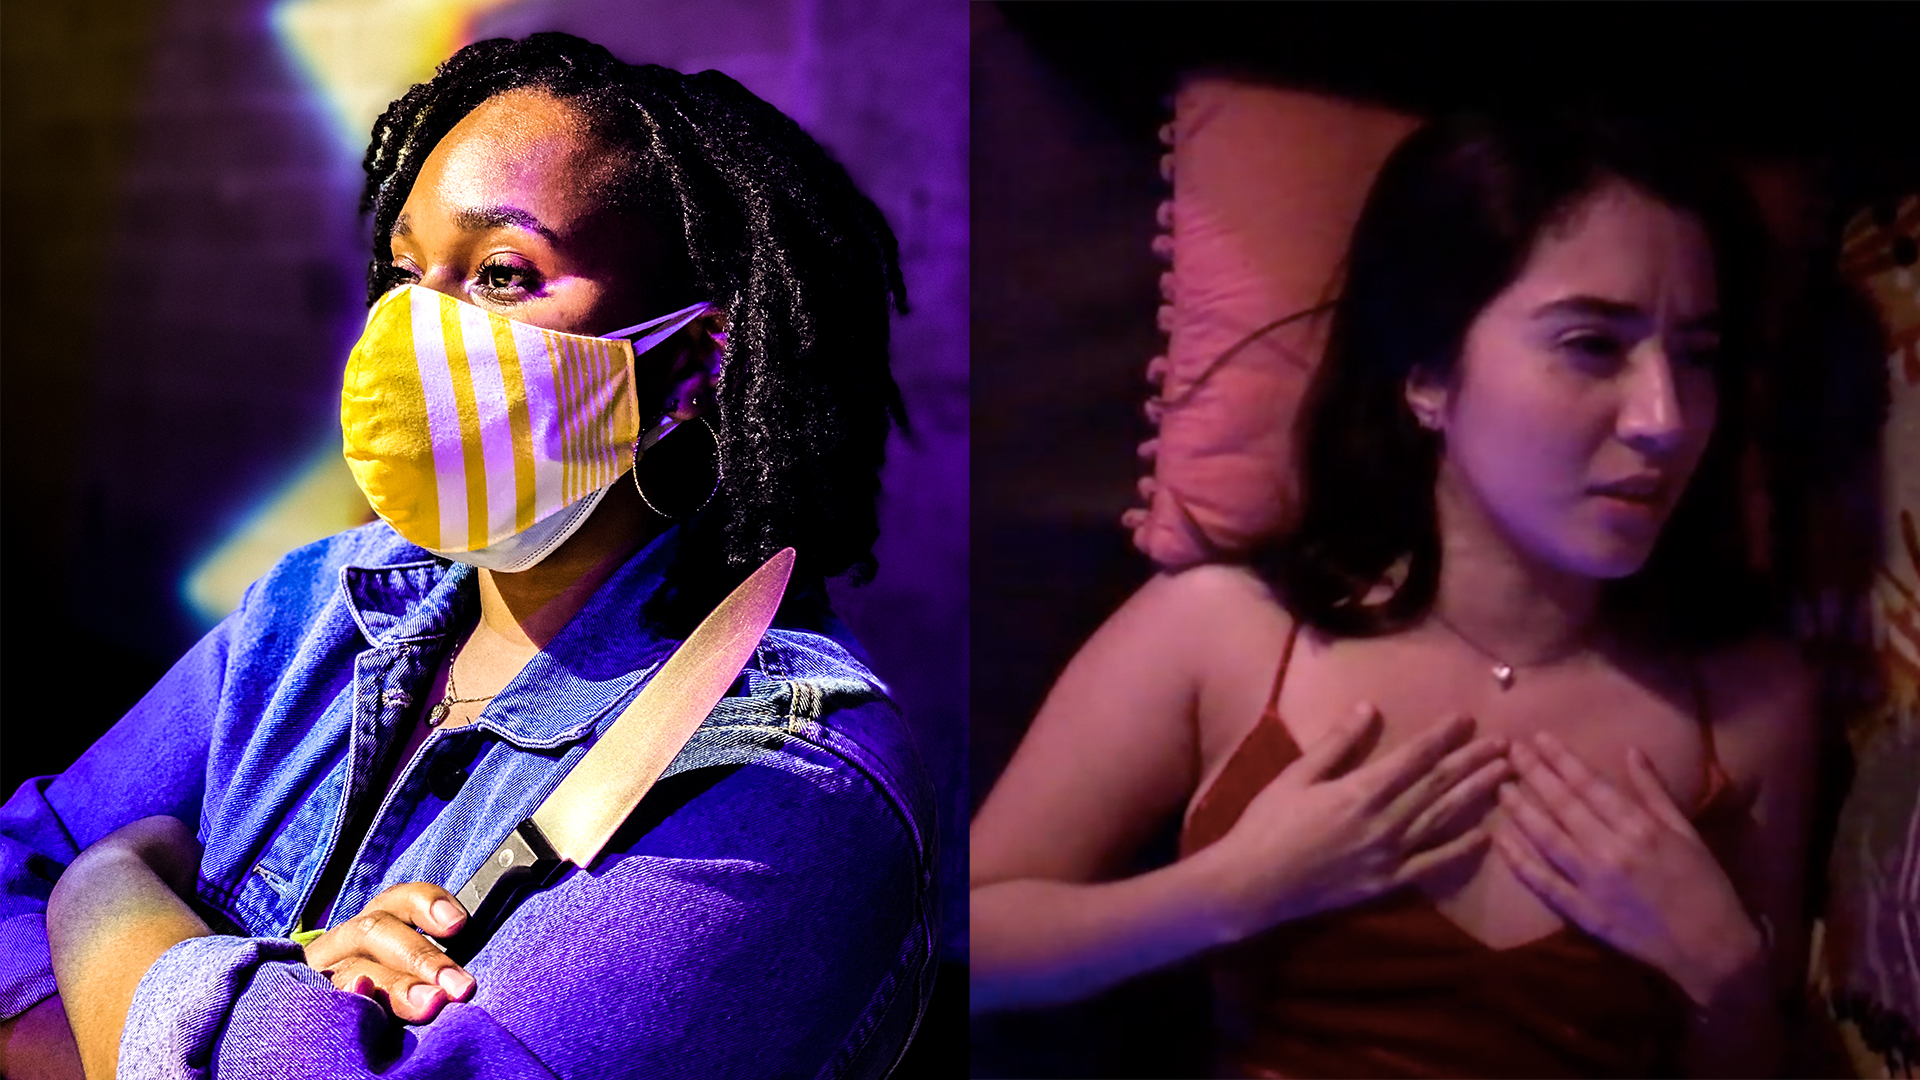 two photos: one is a woman in a mask and the other is a woman lying in bed